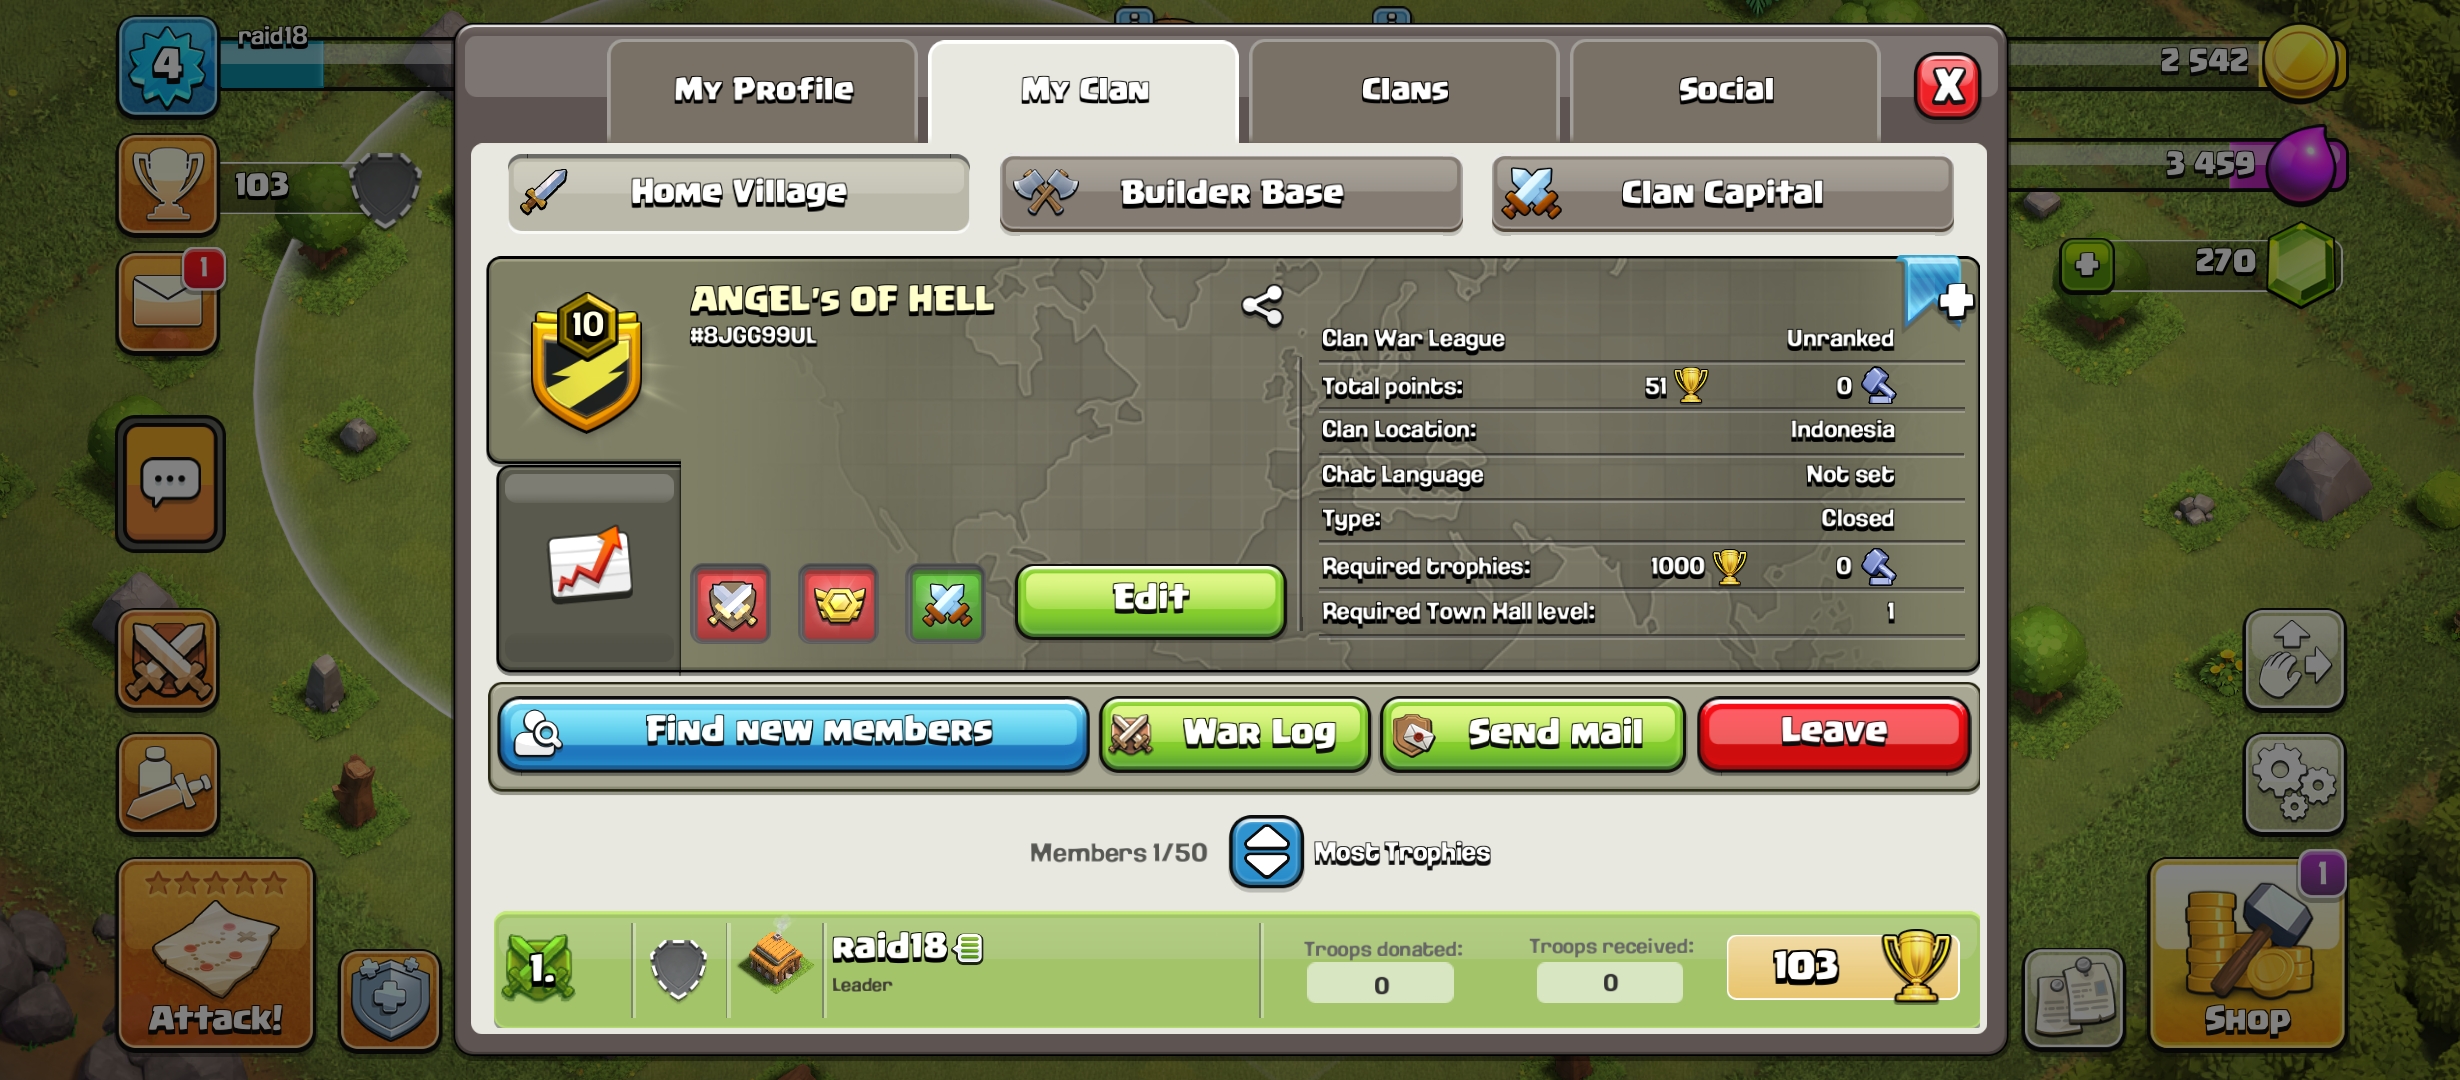 Clan level 10 | Clan Name : ANGEL' s OF HELL | Capital Hall 1 |unranked